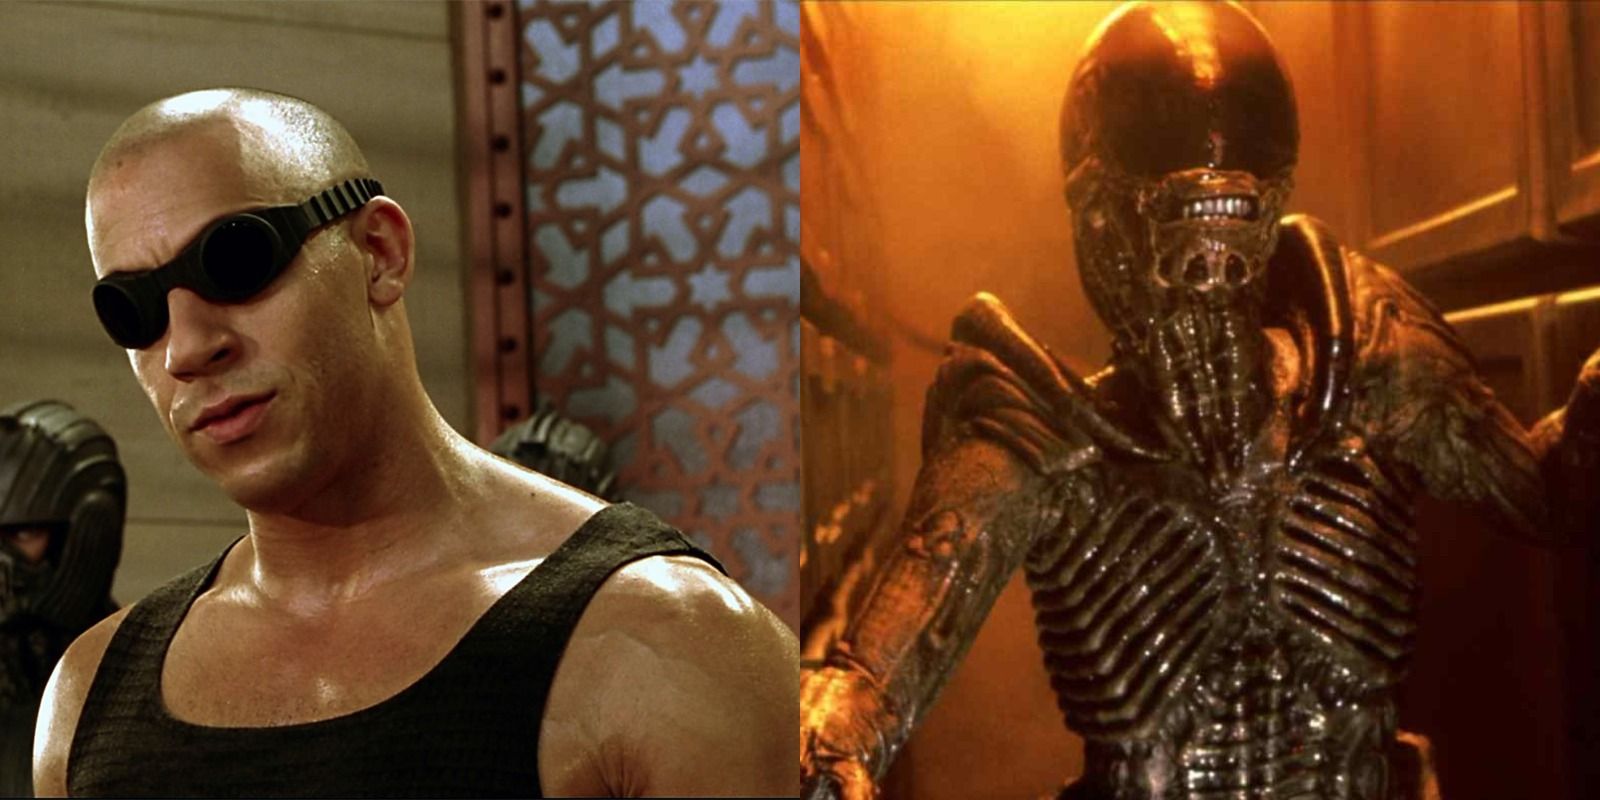 Two side by side images of Vin Diesel in Pitch Black and alien from Alien.